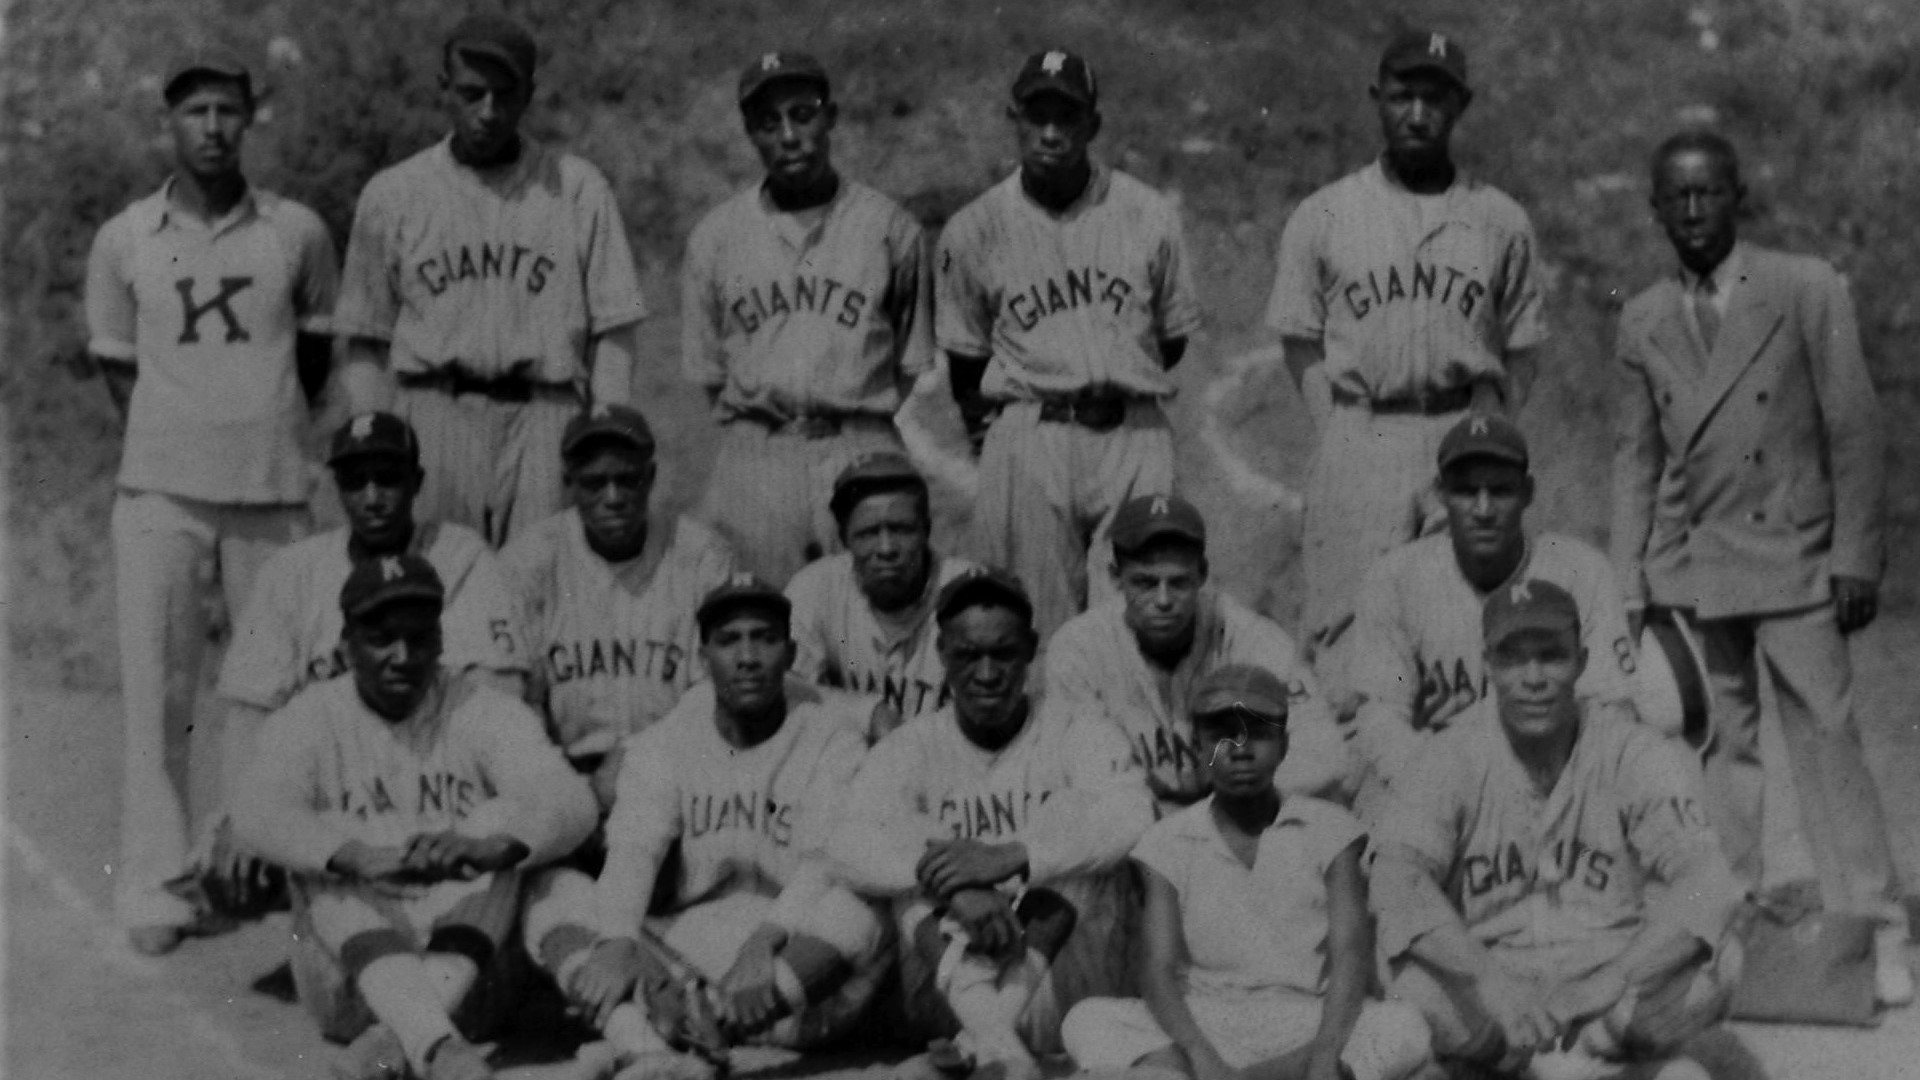 St. Louis Stars I Team History - Seamheads Negro Leagues Database